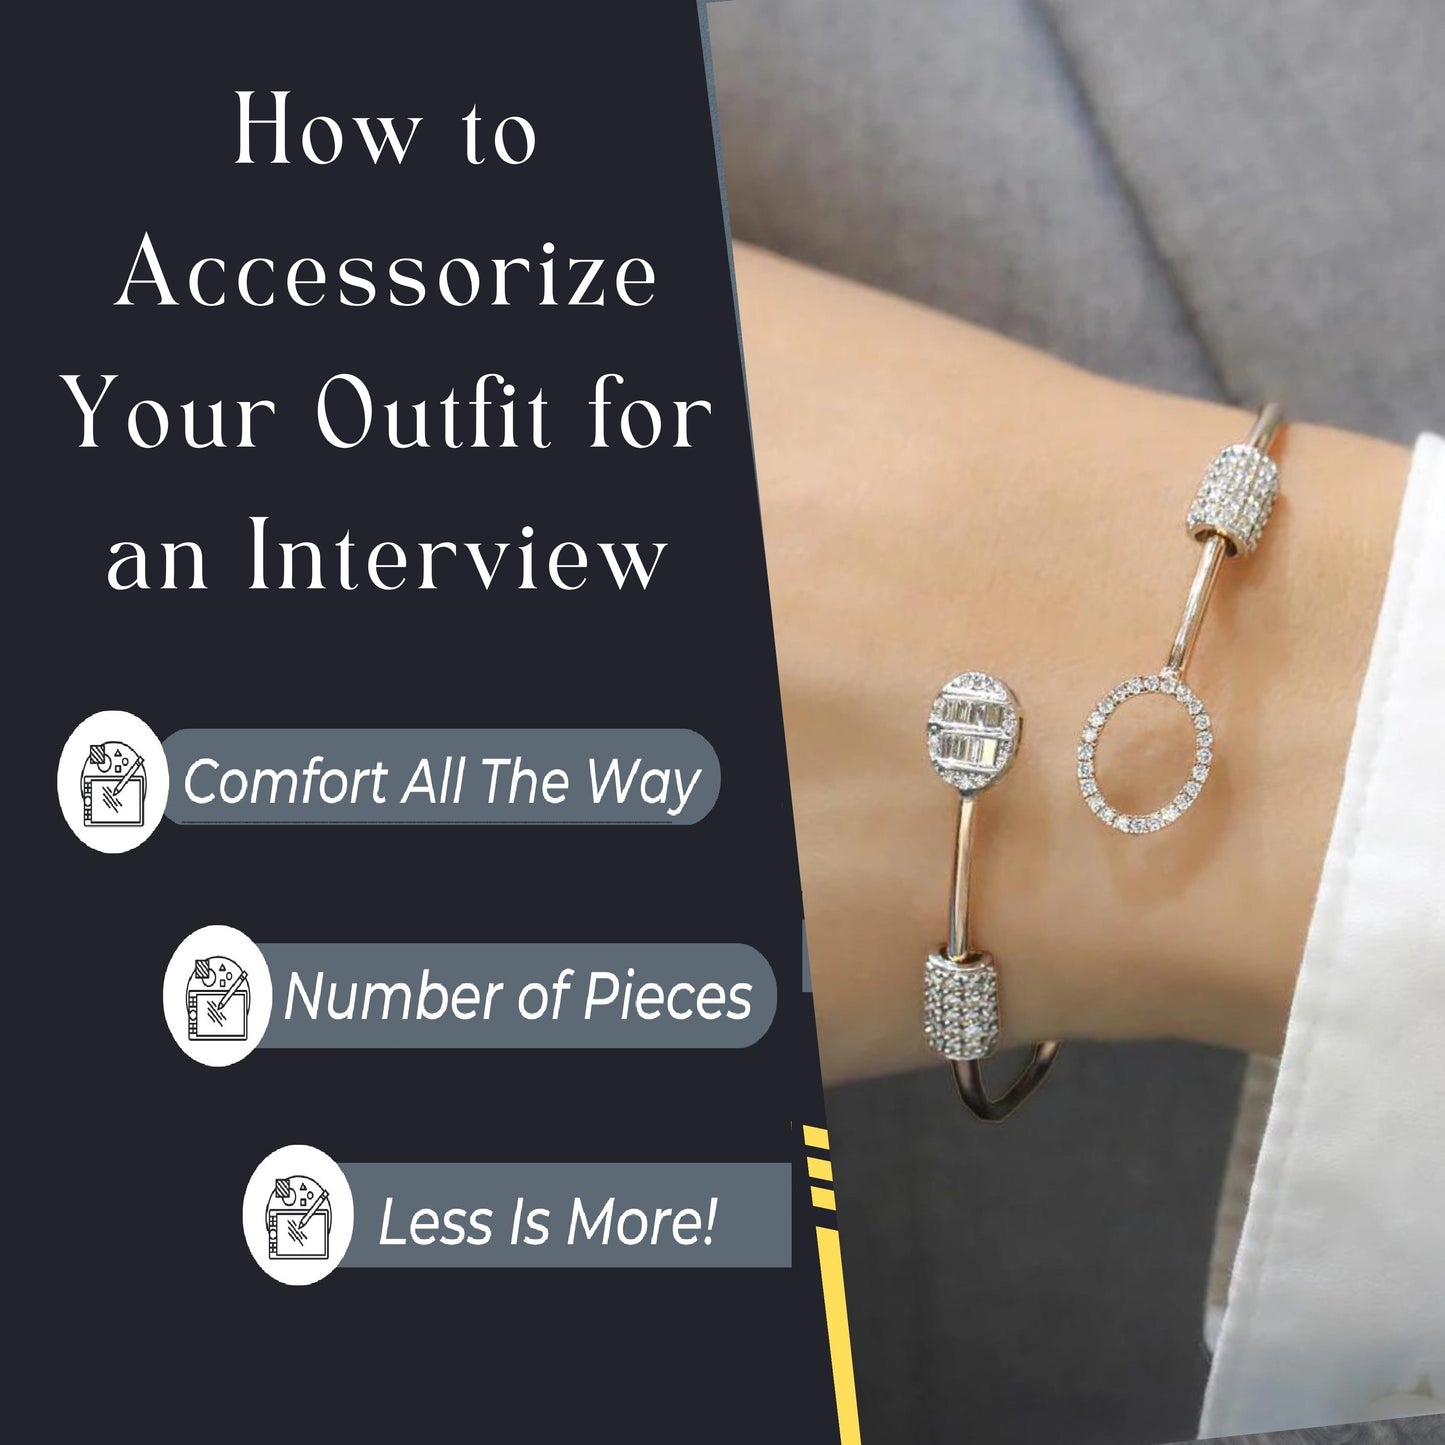 How to Accessorize Your Outfit for an Interview